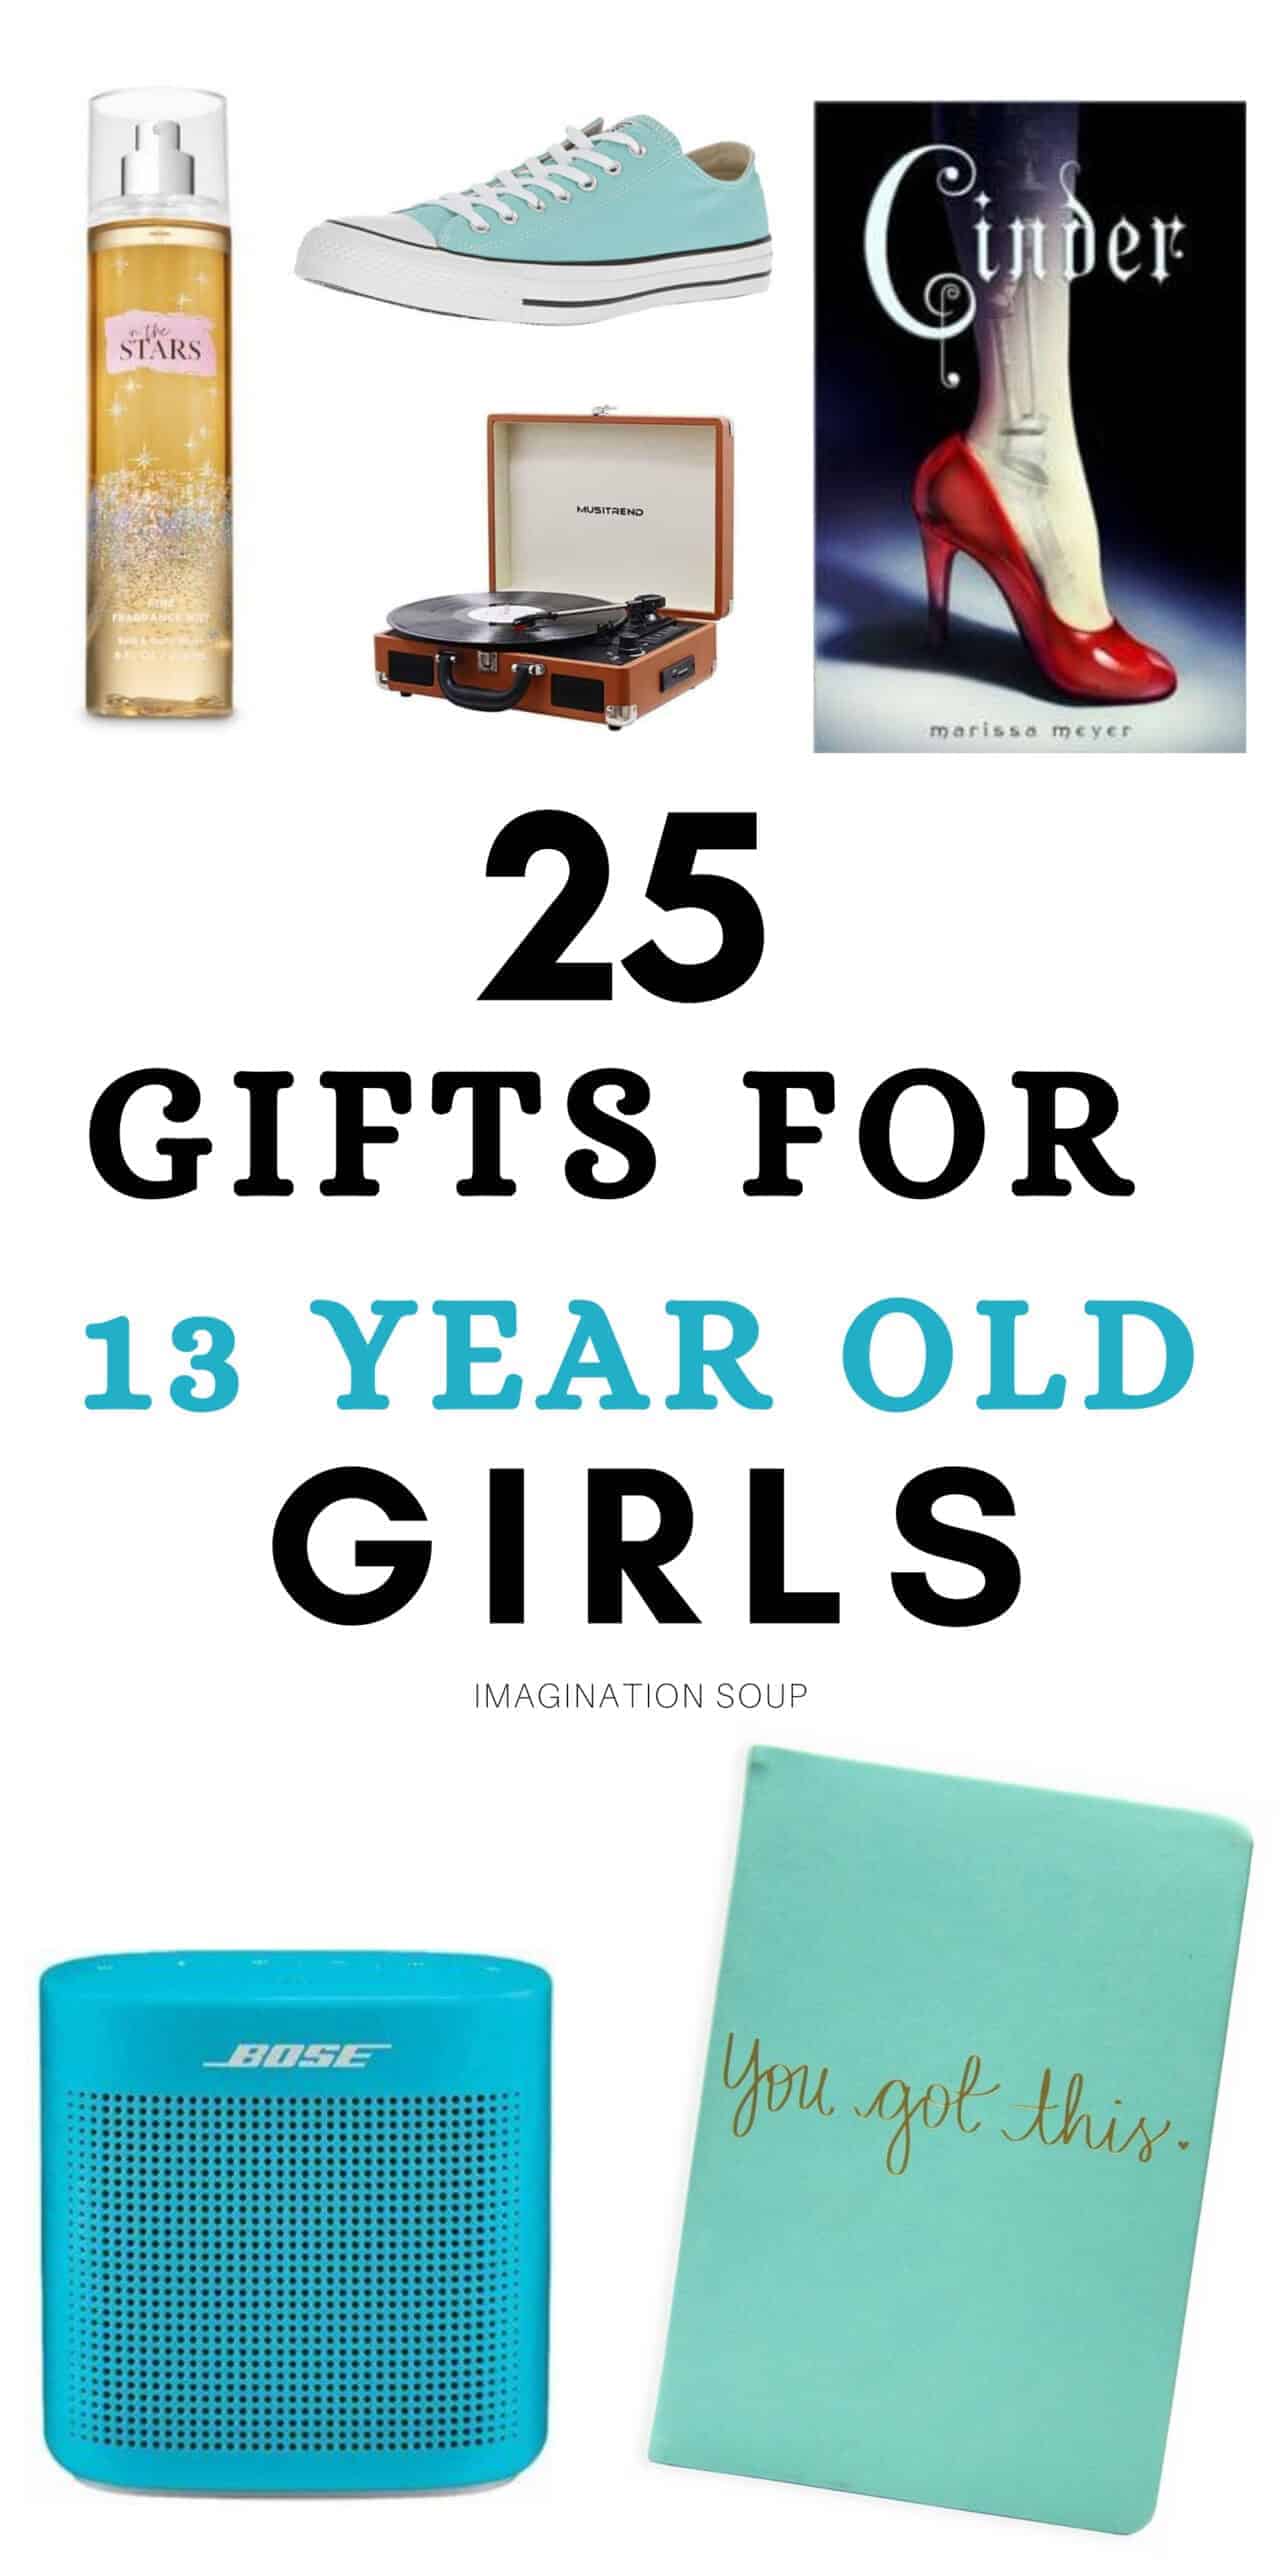 gifts for 13 year old girls